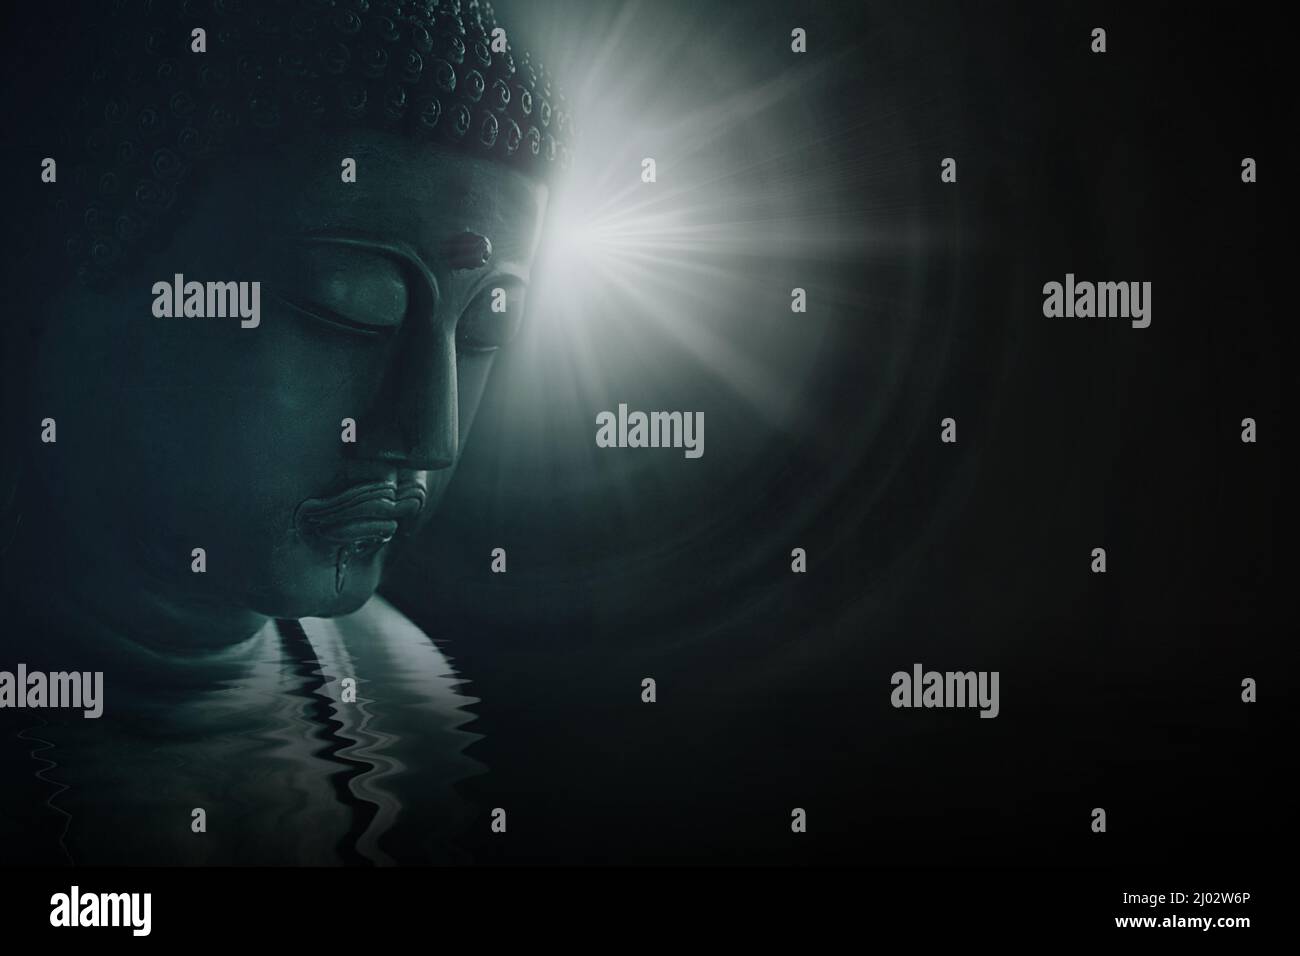 Asian buddha face enlightening wisdom with peace and calm bright light on darkness background. Stock Photo